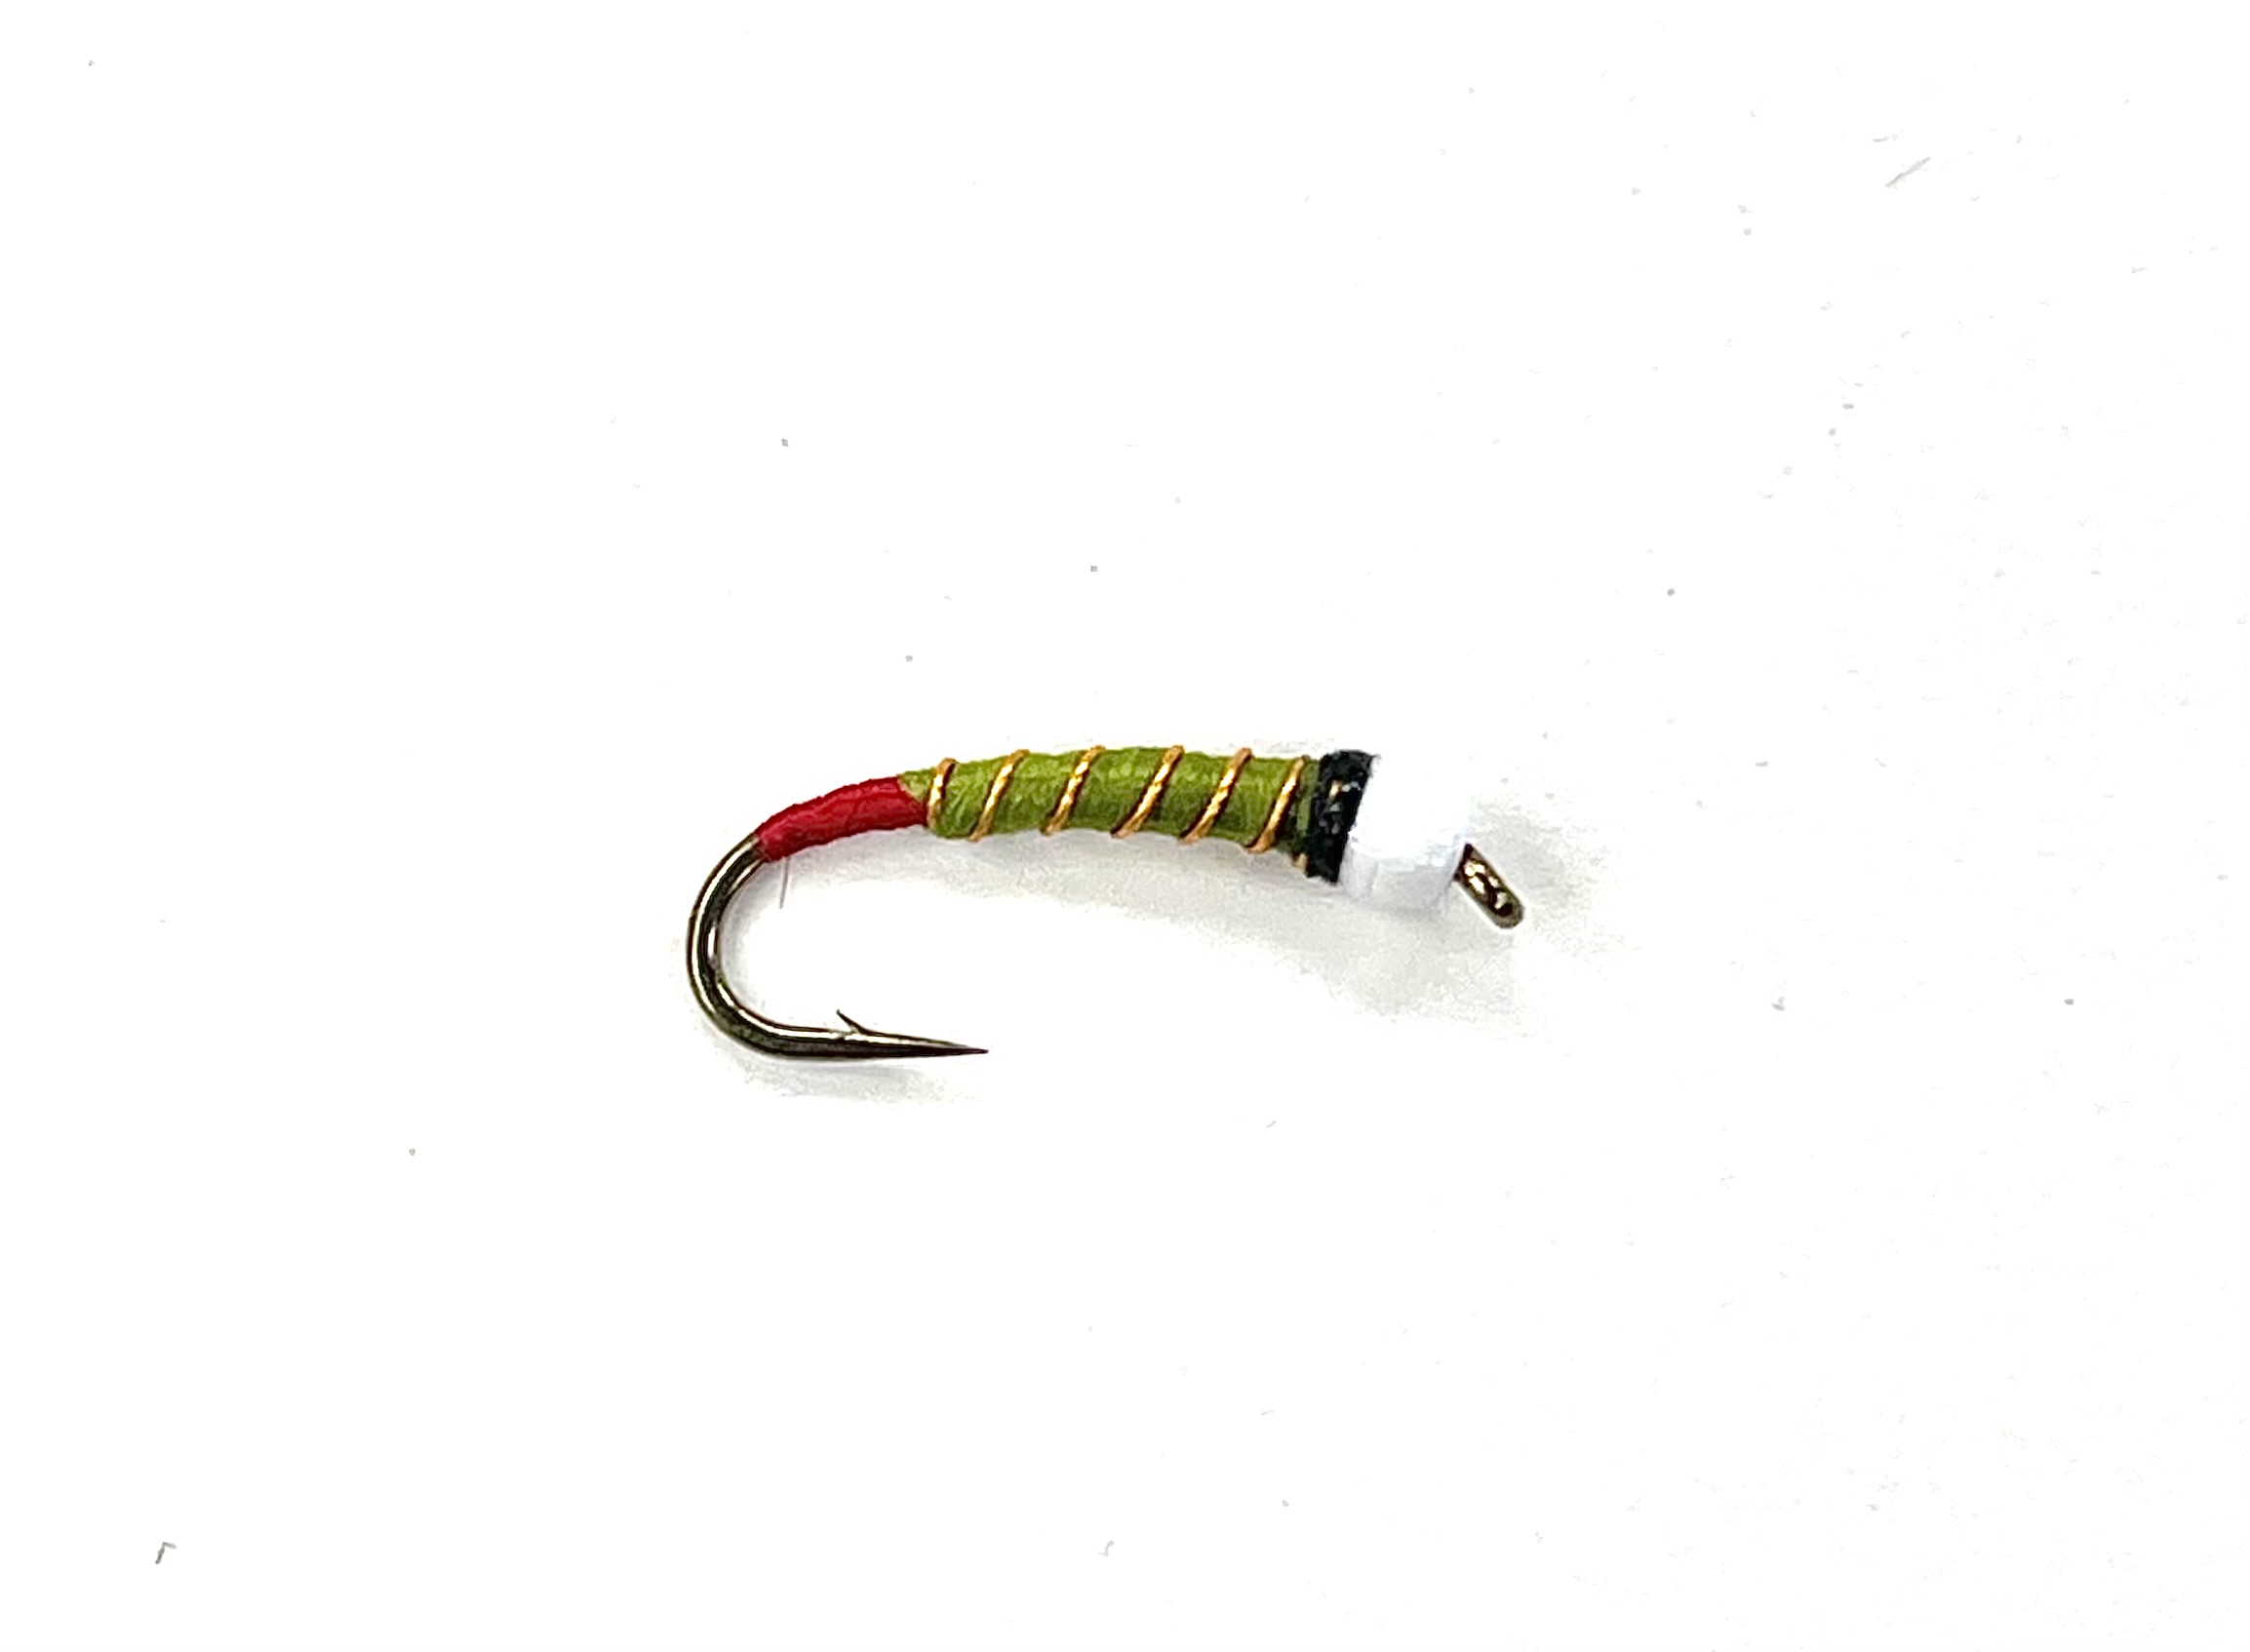 FAD Candy Cone Red Butt Chironomid - Olive/Gold Wire - Size 14